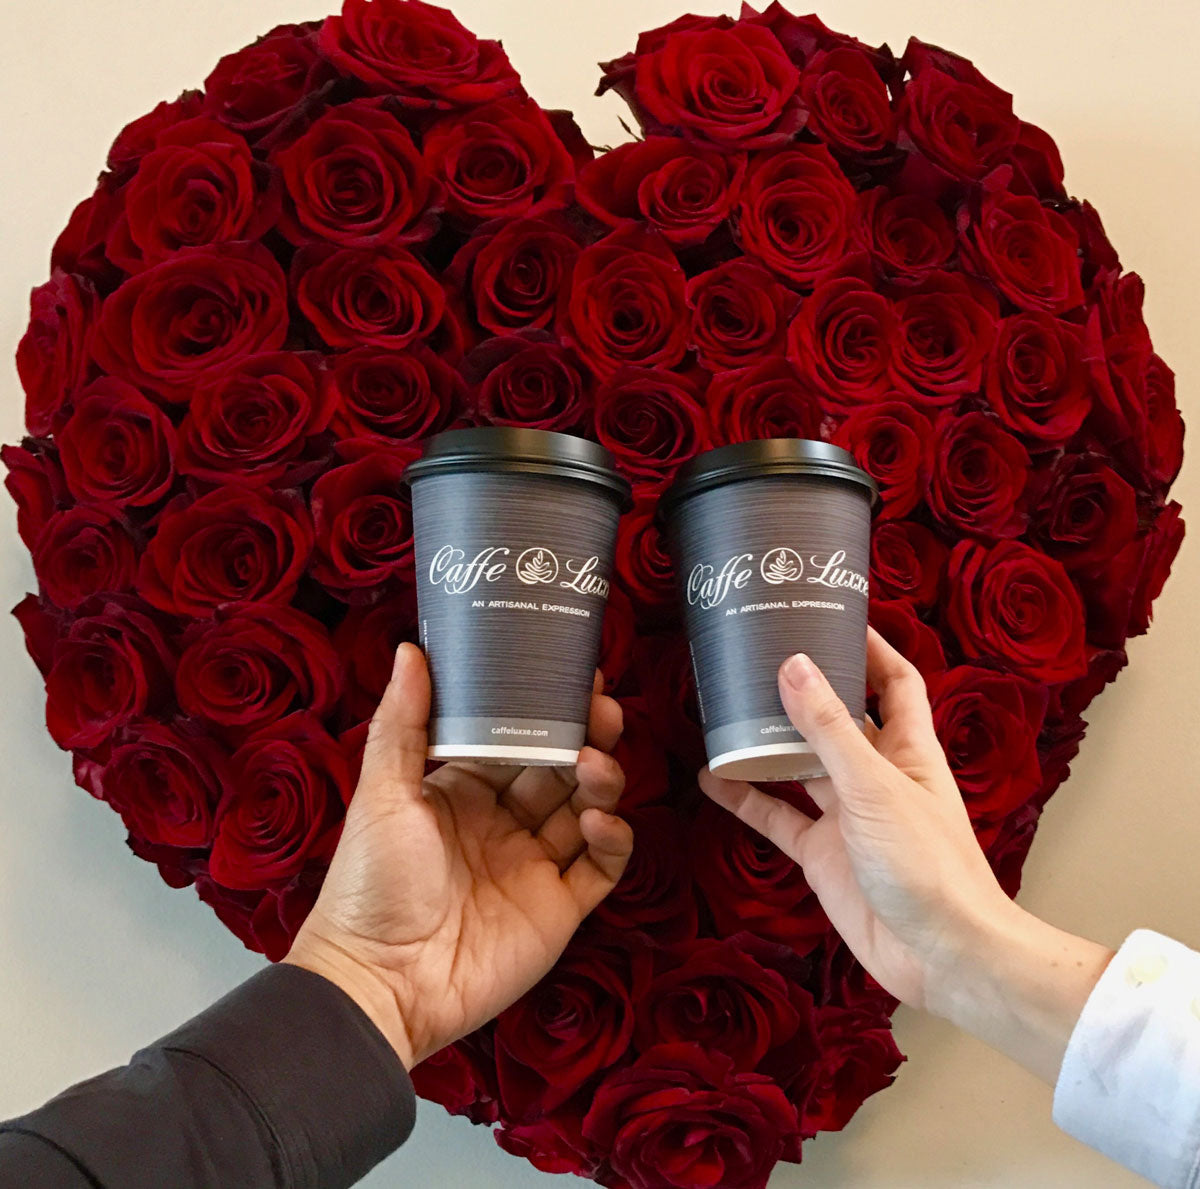 caffe luxxe coffee cups in front of heart rose bouquet